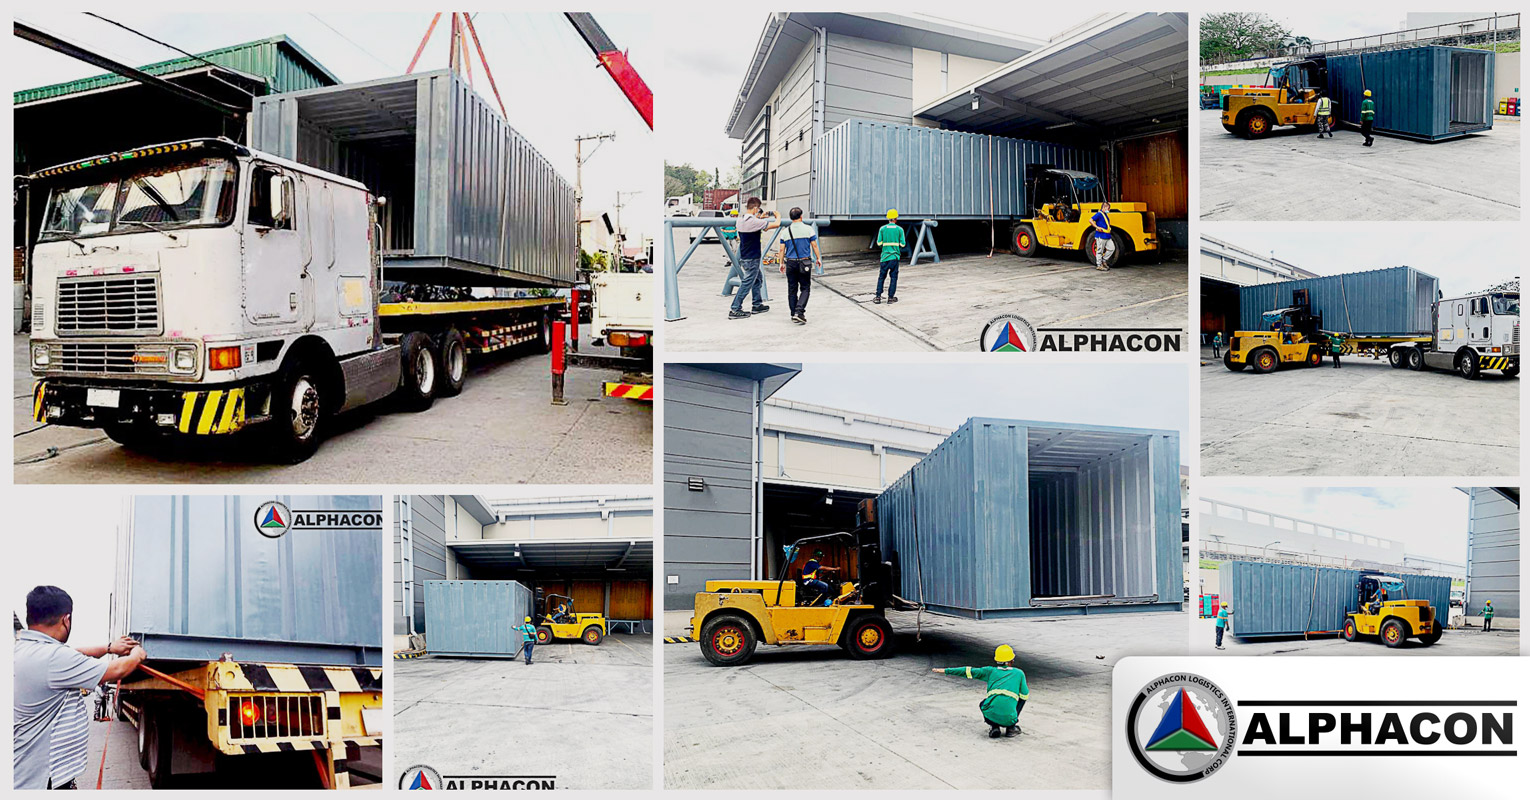 Alphacon Logistics Handled the Transfer, Unloading and Positioning of 1-Unit Over-width Fabricated Chemical Storage